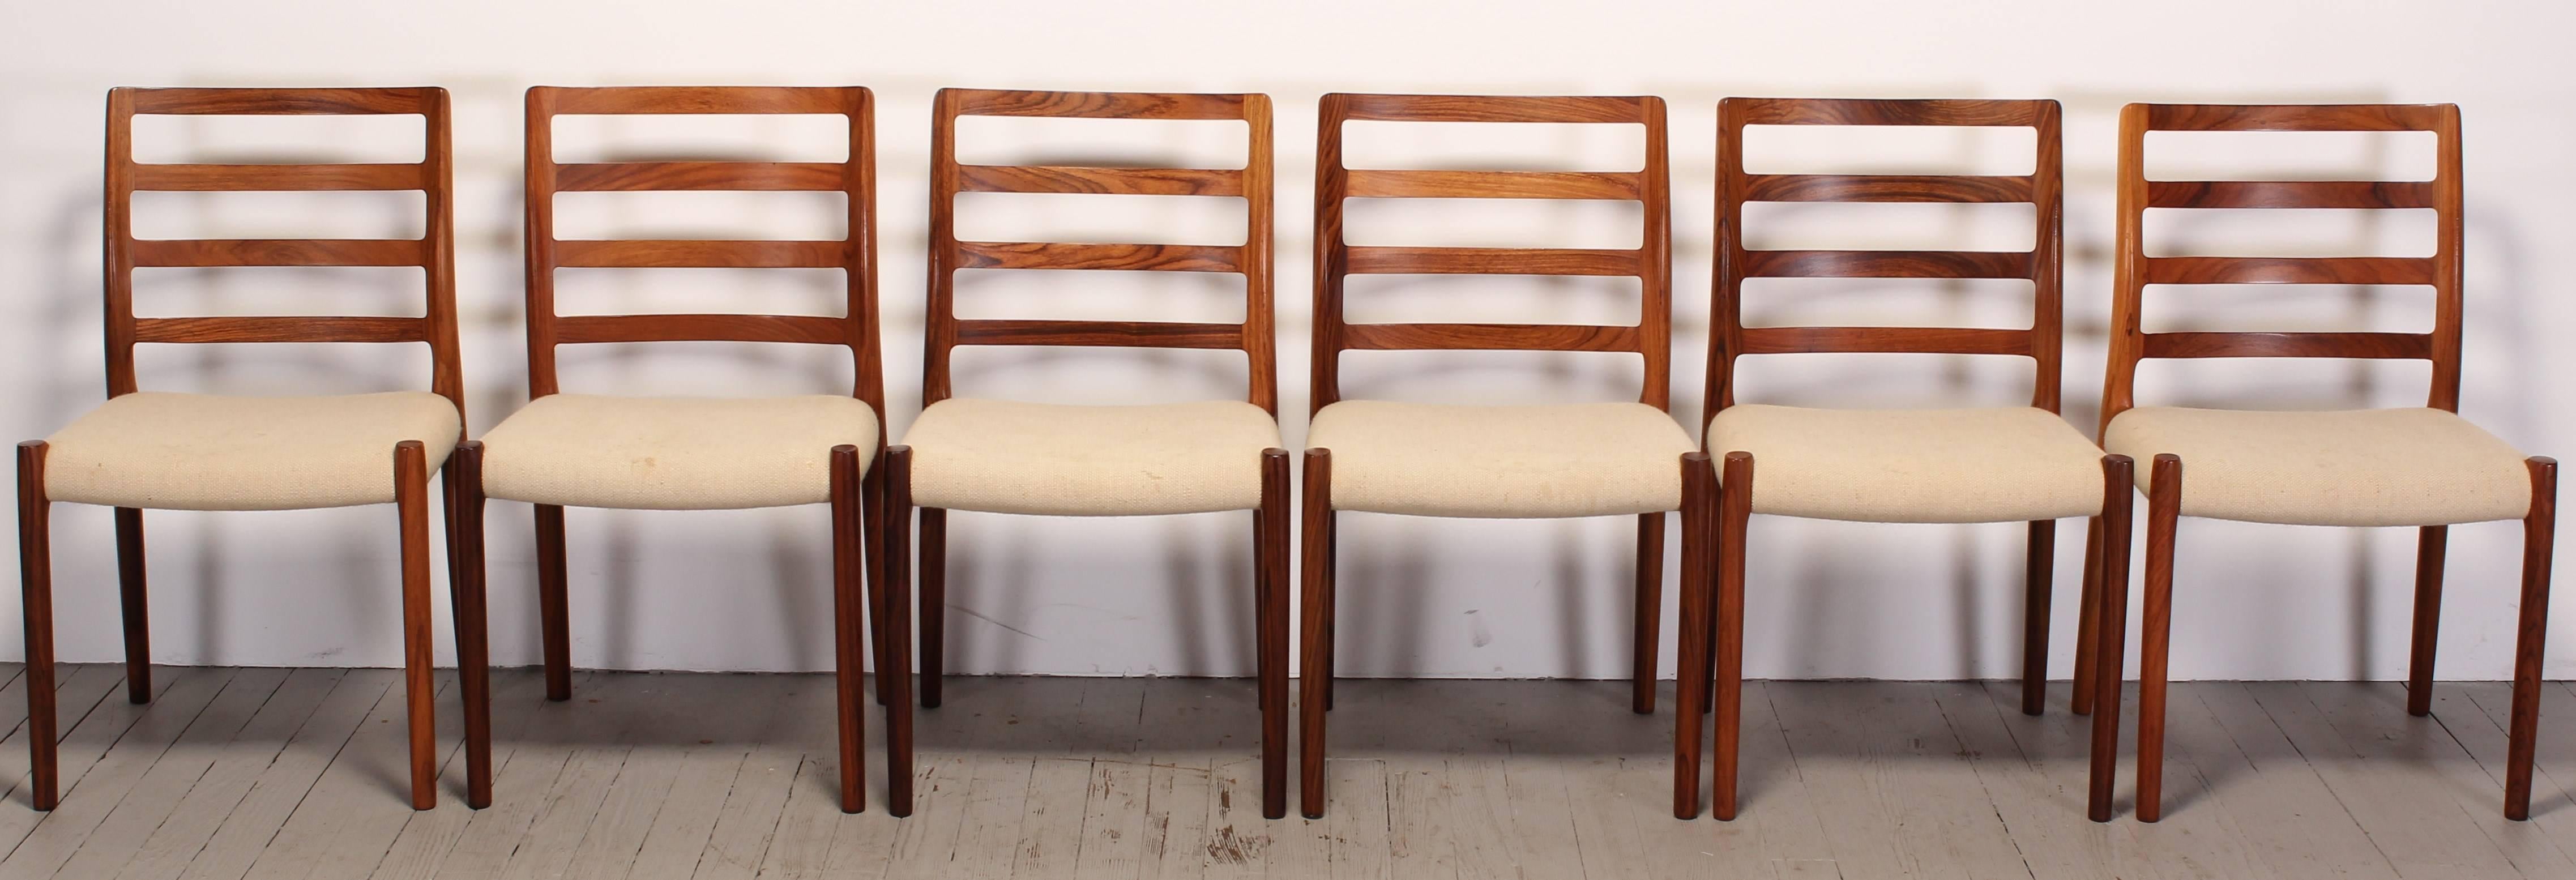 A  fine set of six rosewood dining chairs by Niels O. Møller for J.L. Moller.  The model 85 chair is one of Moller's stoutest designs in their large variety of chair designs, well constructed chairs with great form. Designed in 1981, labeled